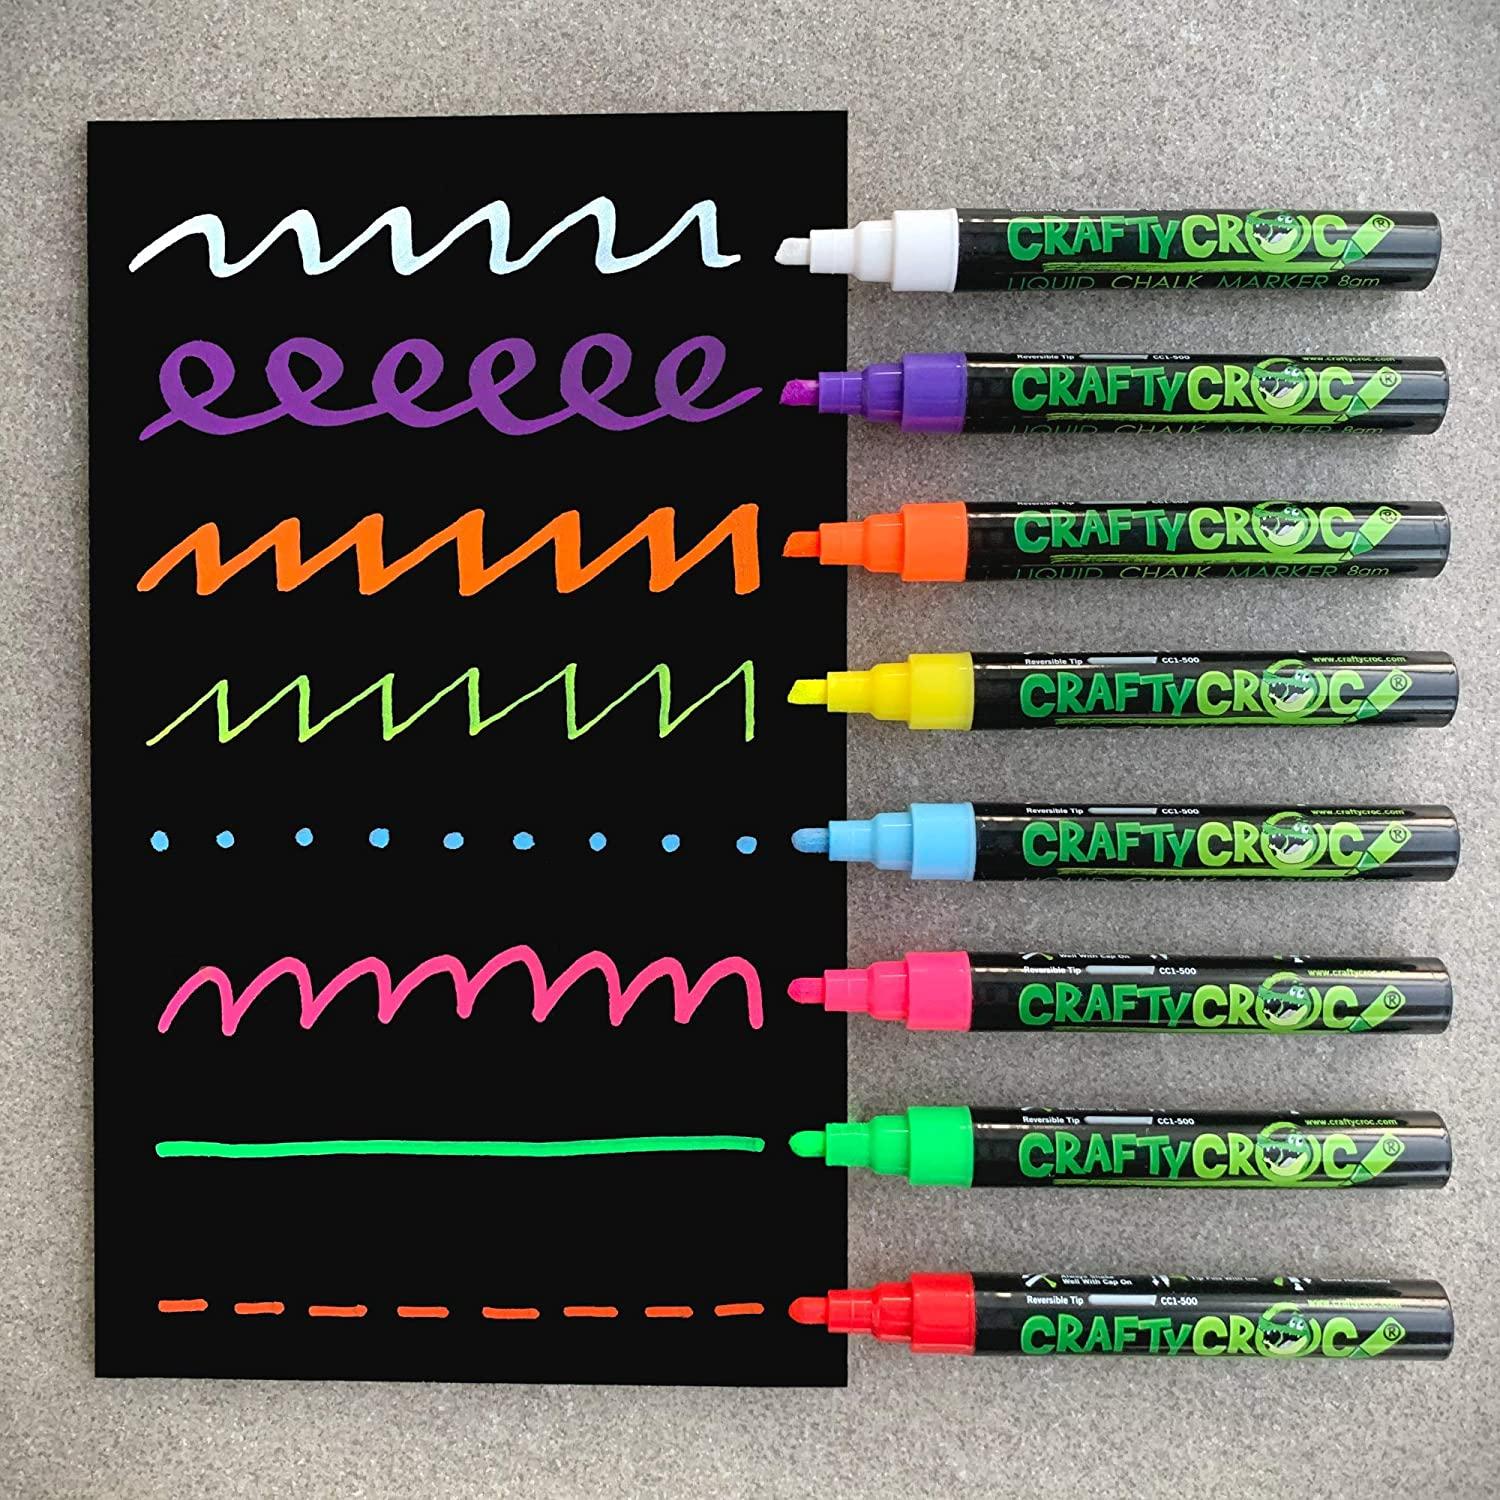 Liquid Chalk Markers for Blackboards - Use as Glass Window Markers, Mirror  Pens, Blackboard or Chalkboard Markers - 8 Bold Neon Colors - Wet or Dry  Erase Chalk Pens for Easy Clean Up Standard Ink